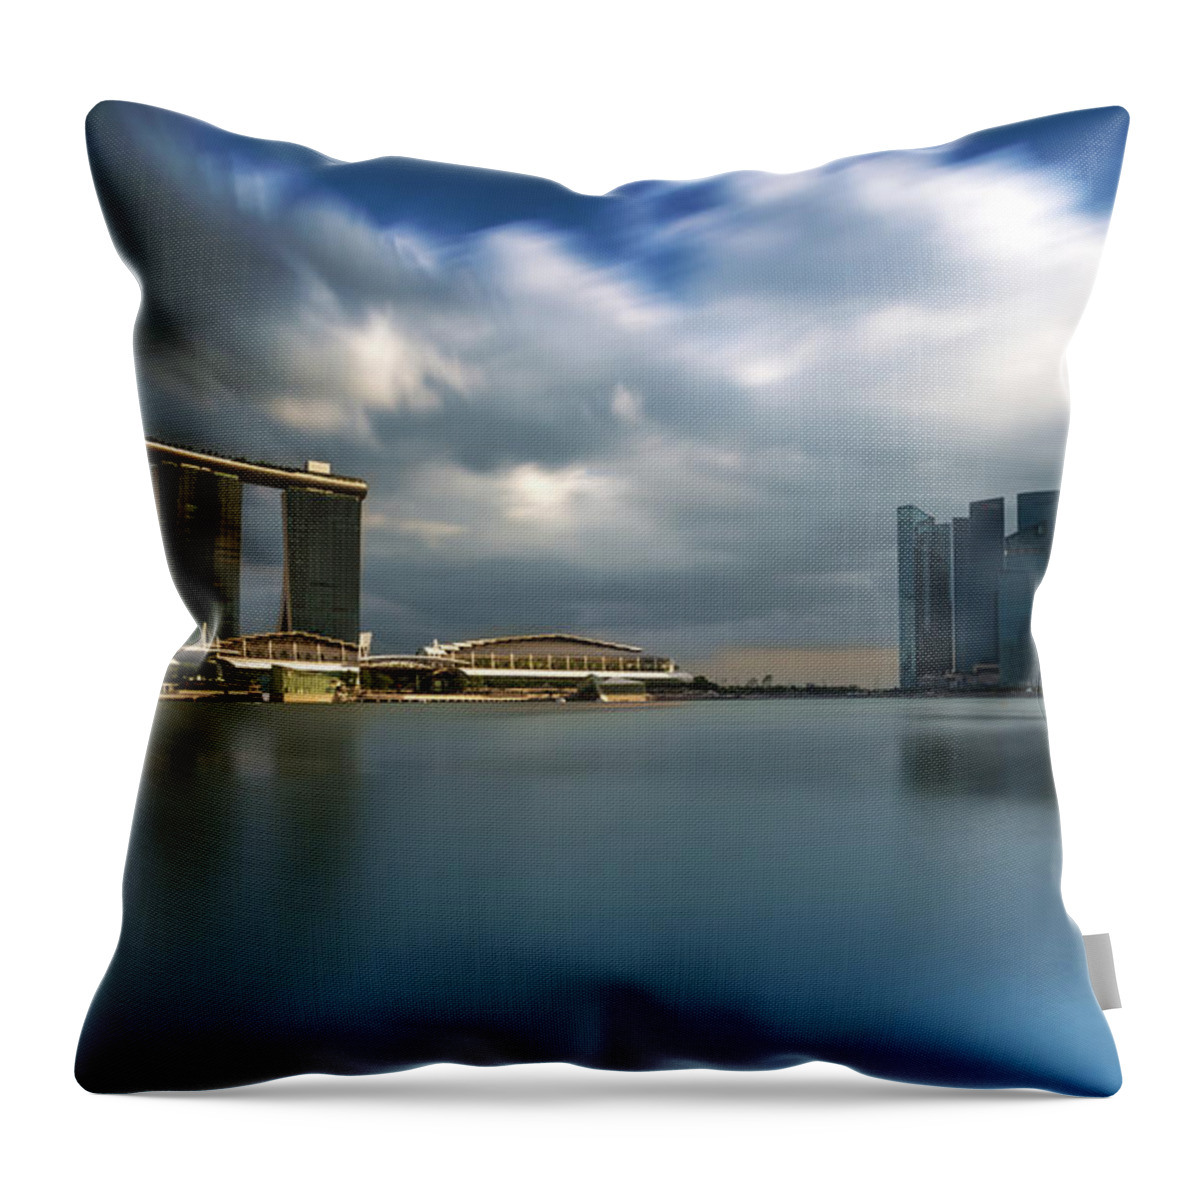 Tranquility Throw Pillow featuring the photograph Singapore by Arthit Somsakul